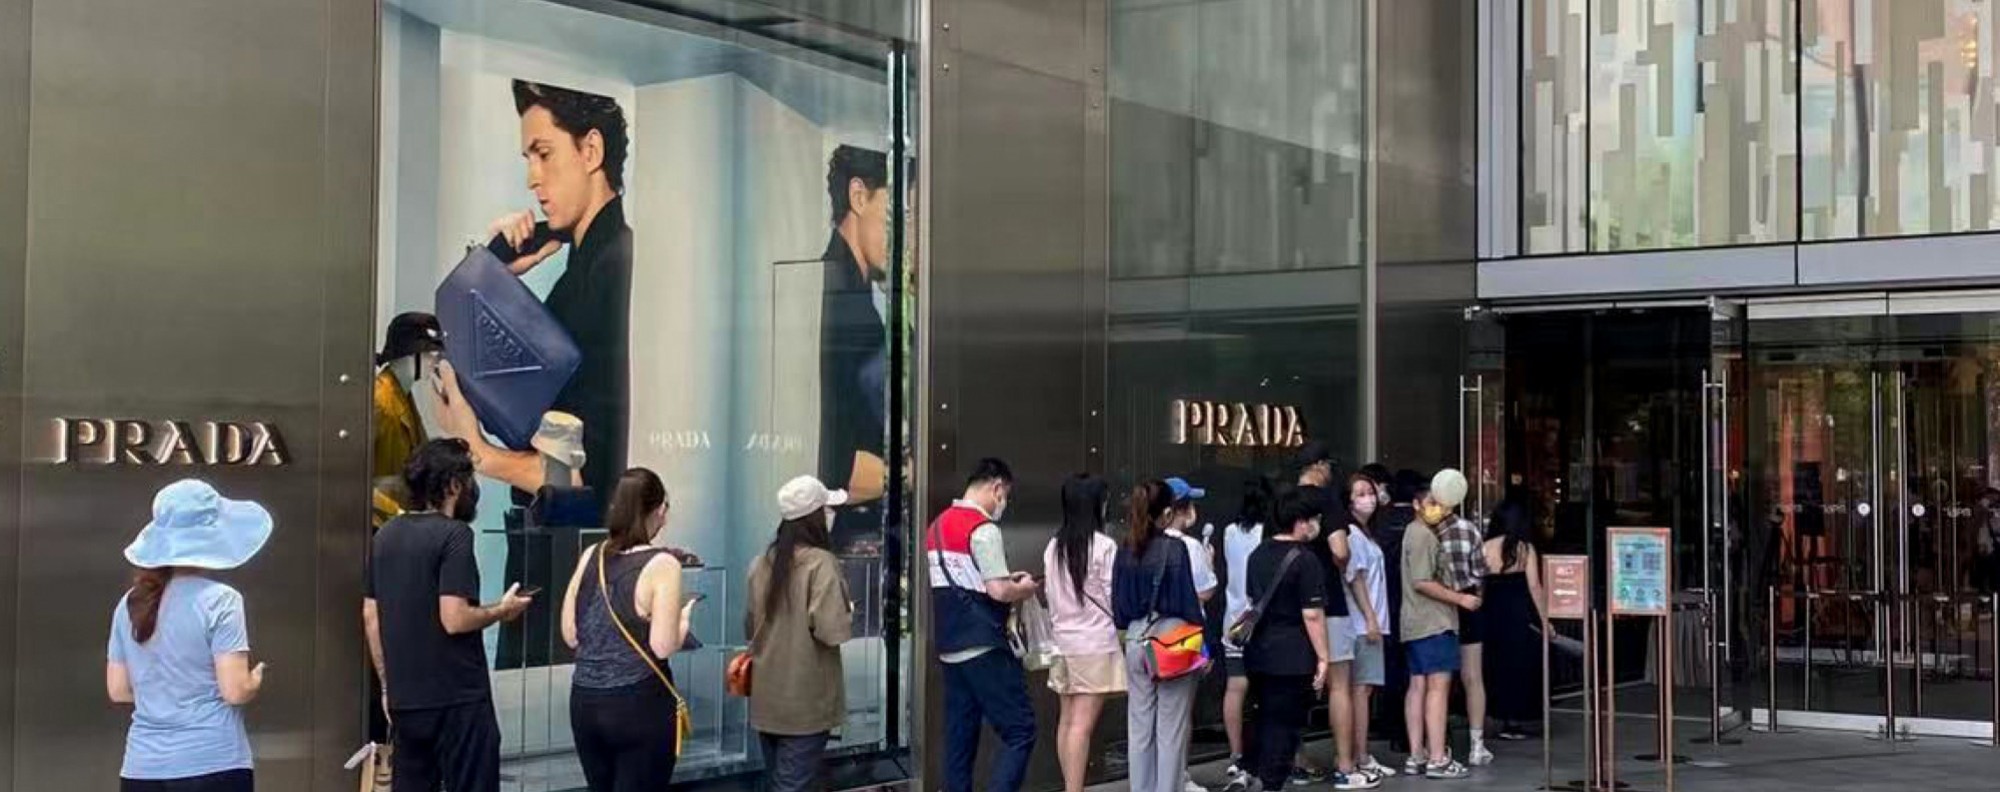 Fashion-obsessed Shanghai residents flocked to luxury stores on the first  day of the city's reopening after its brutal lockdown